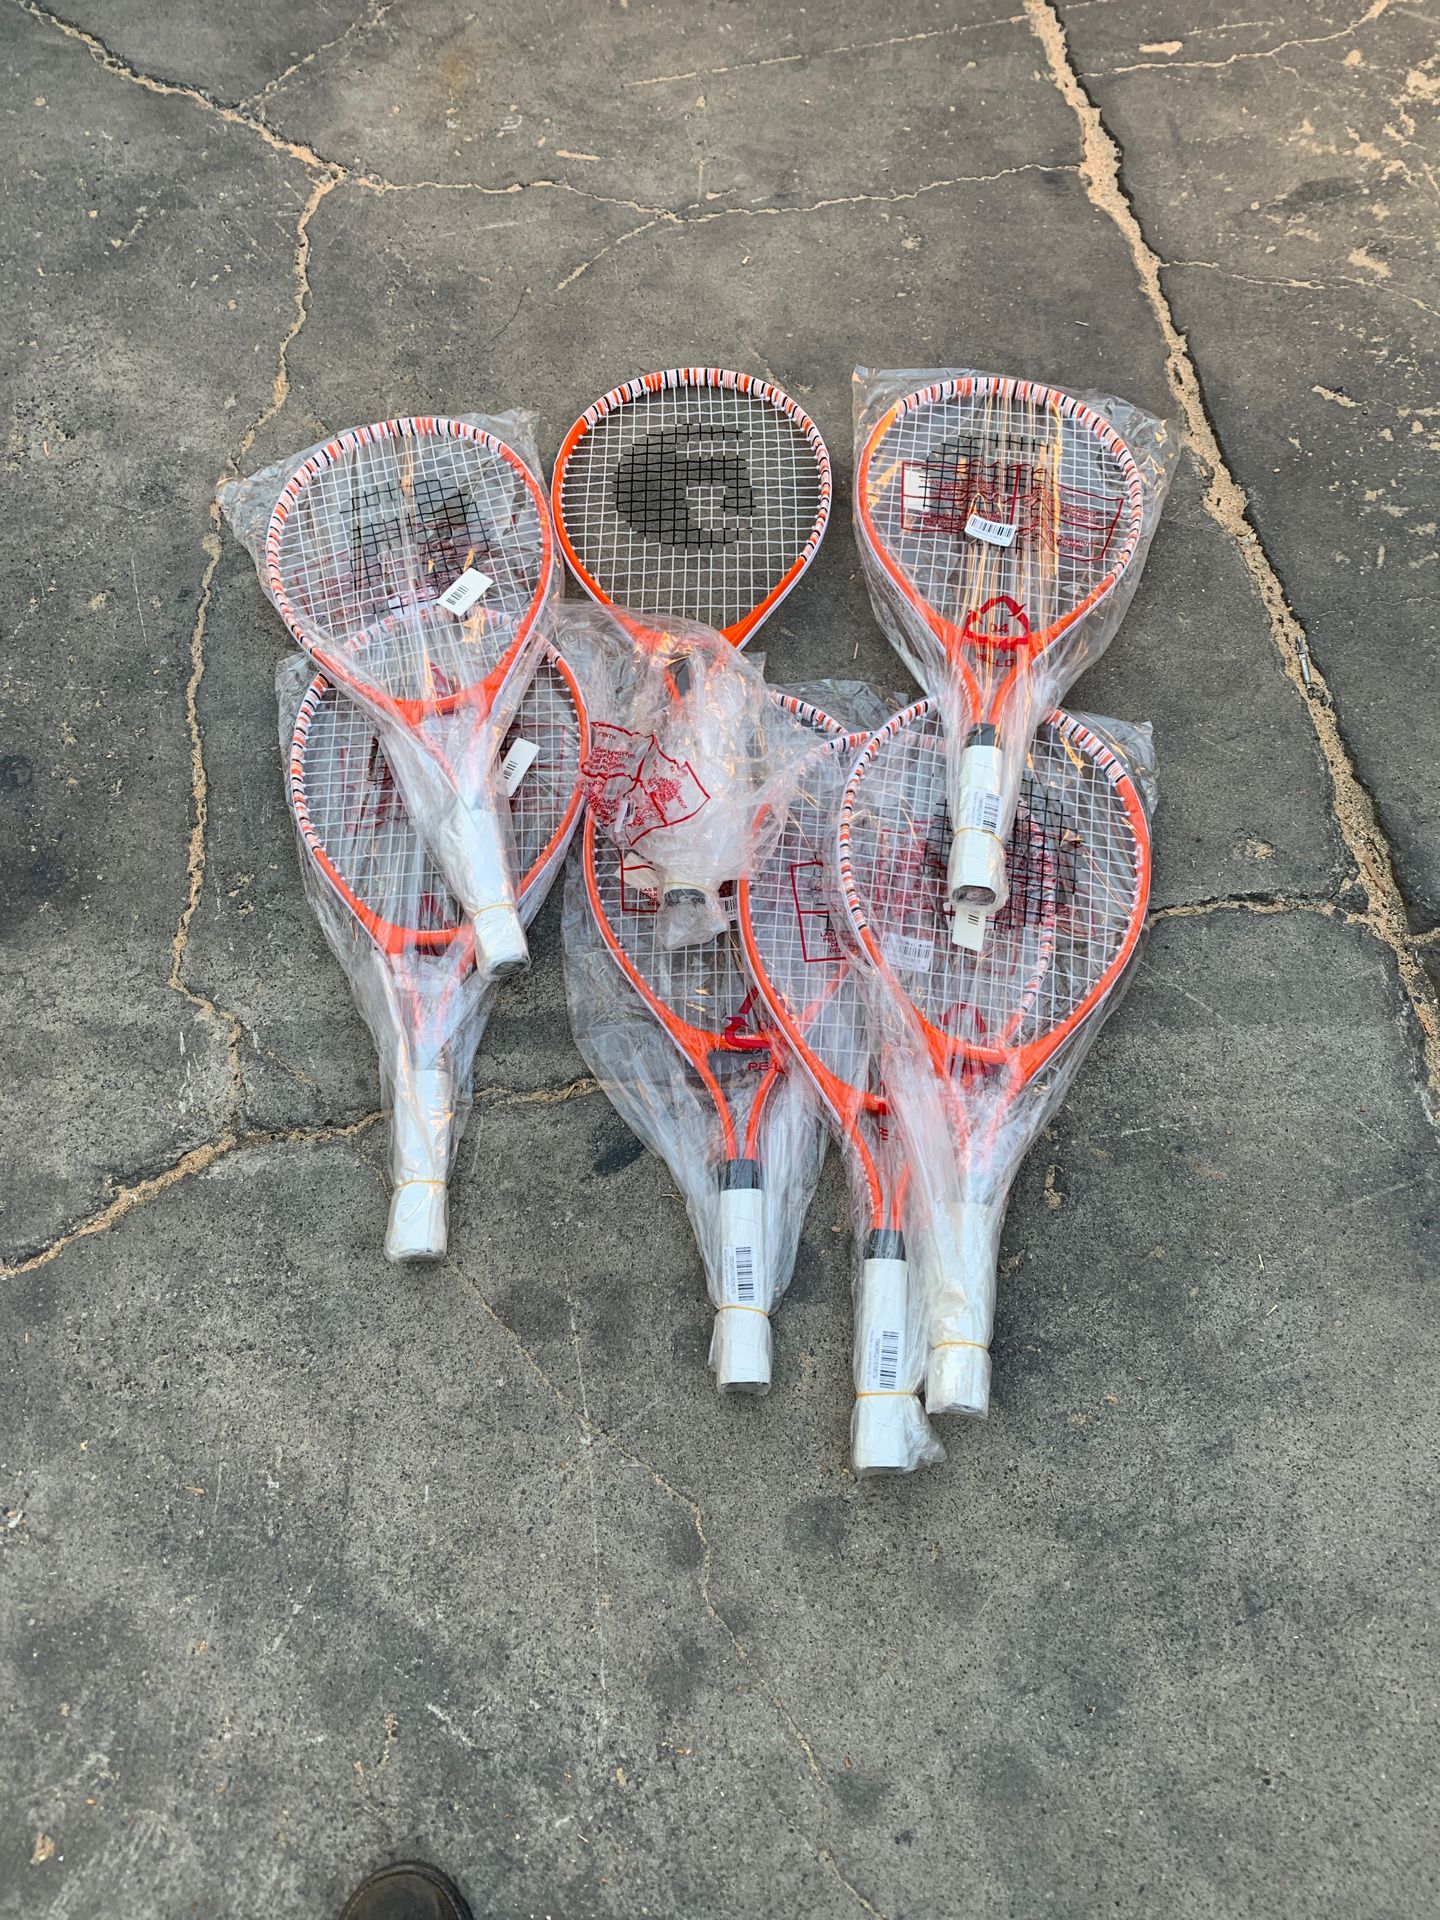 I have 50 tennis rackets one dollars each